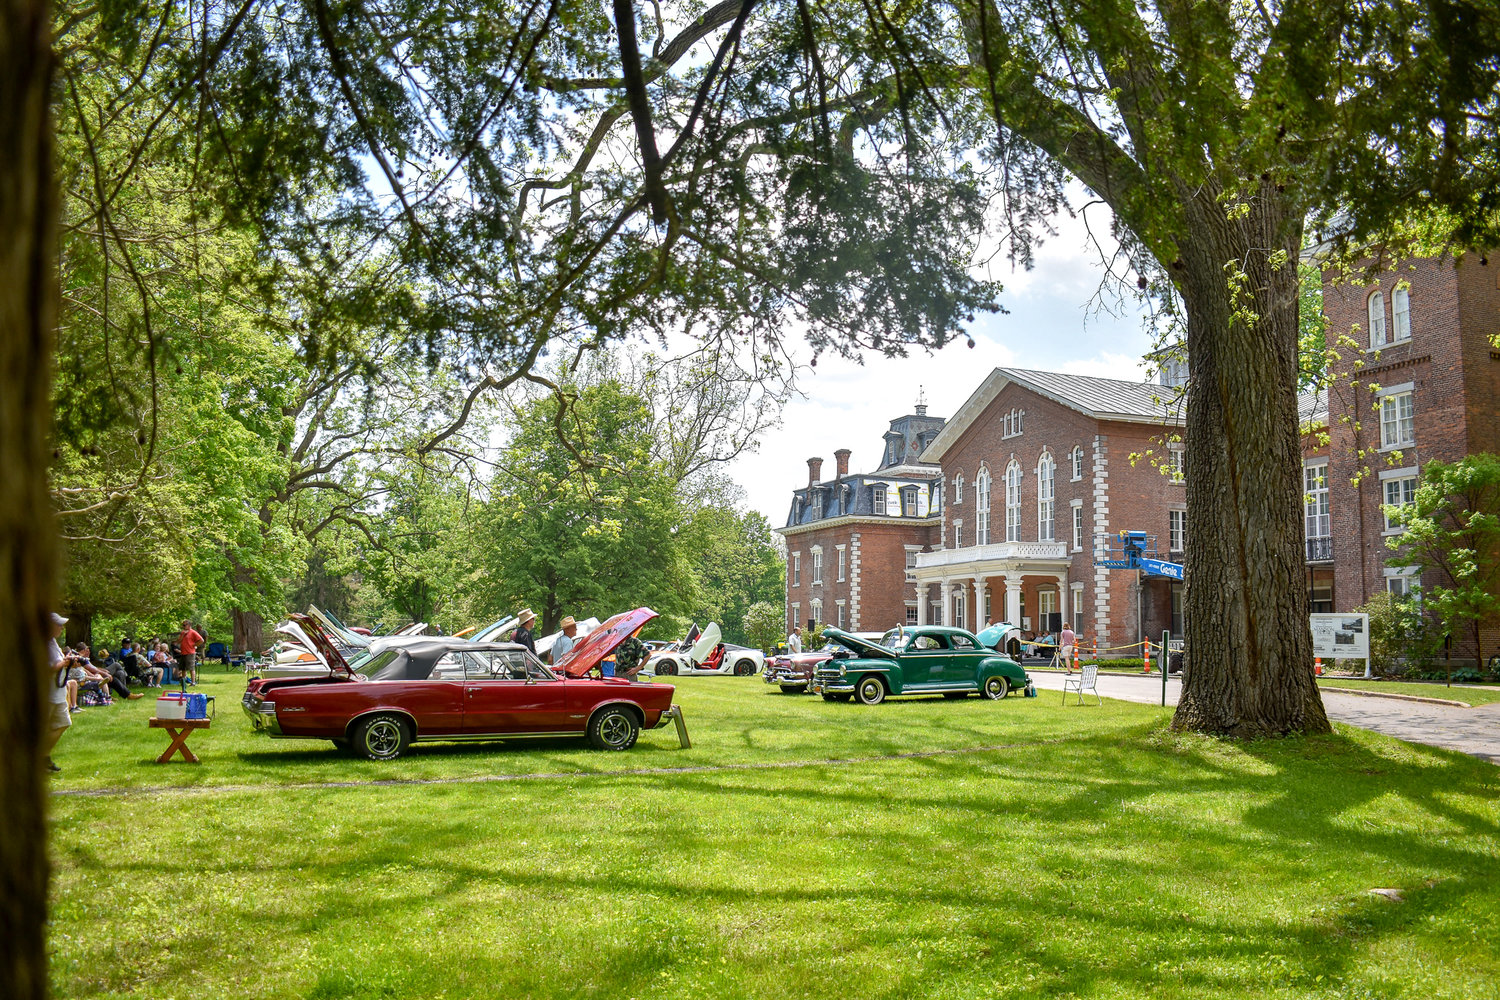 Some local and automotive history was on display during a recent classic car show at the Oneida Community Mansion House.